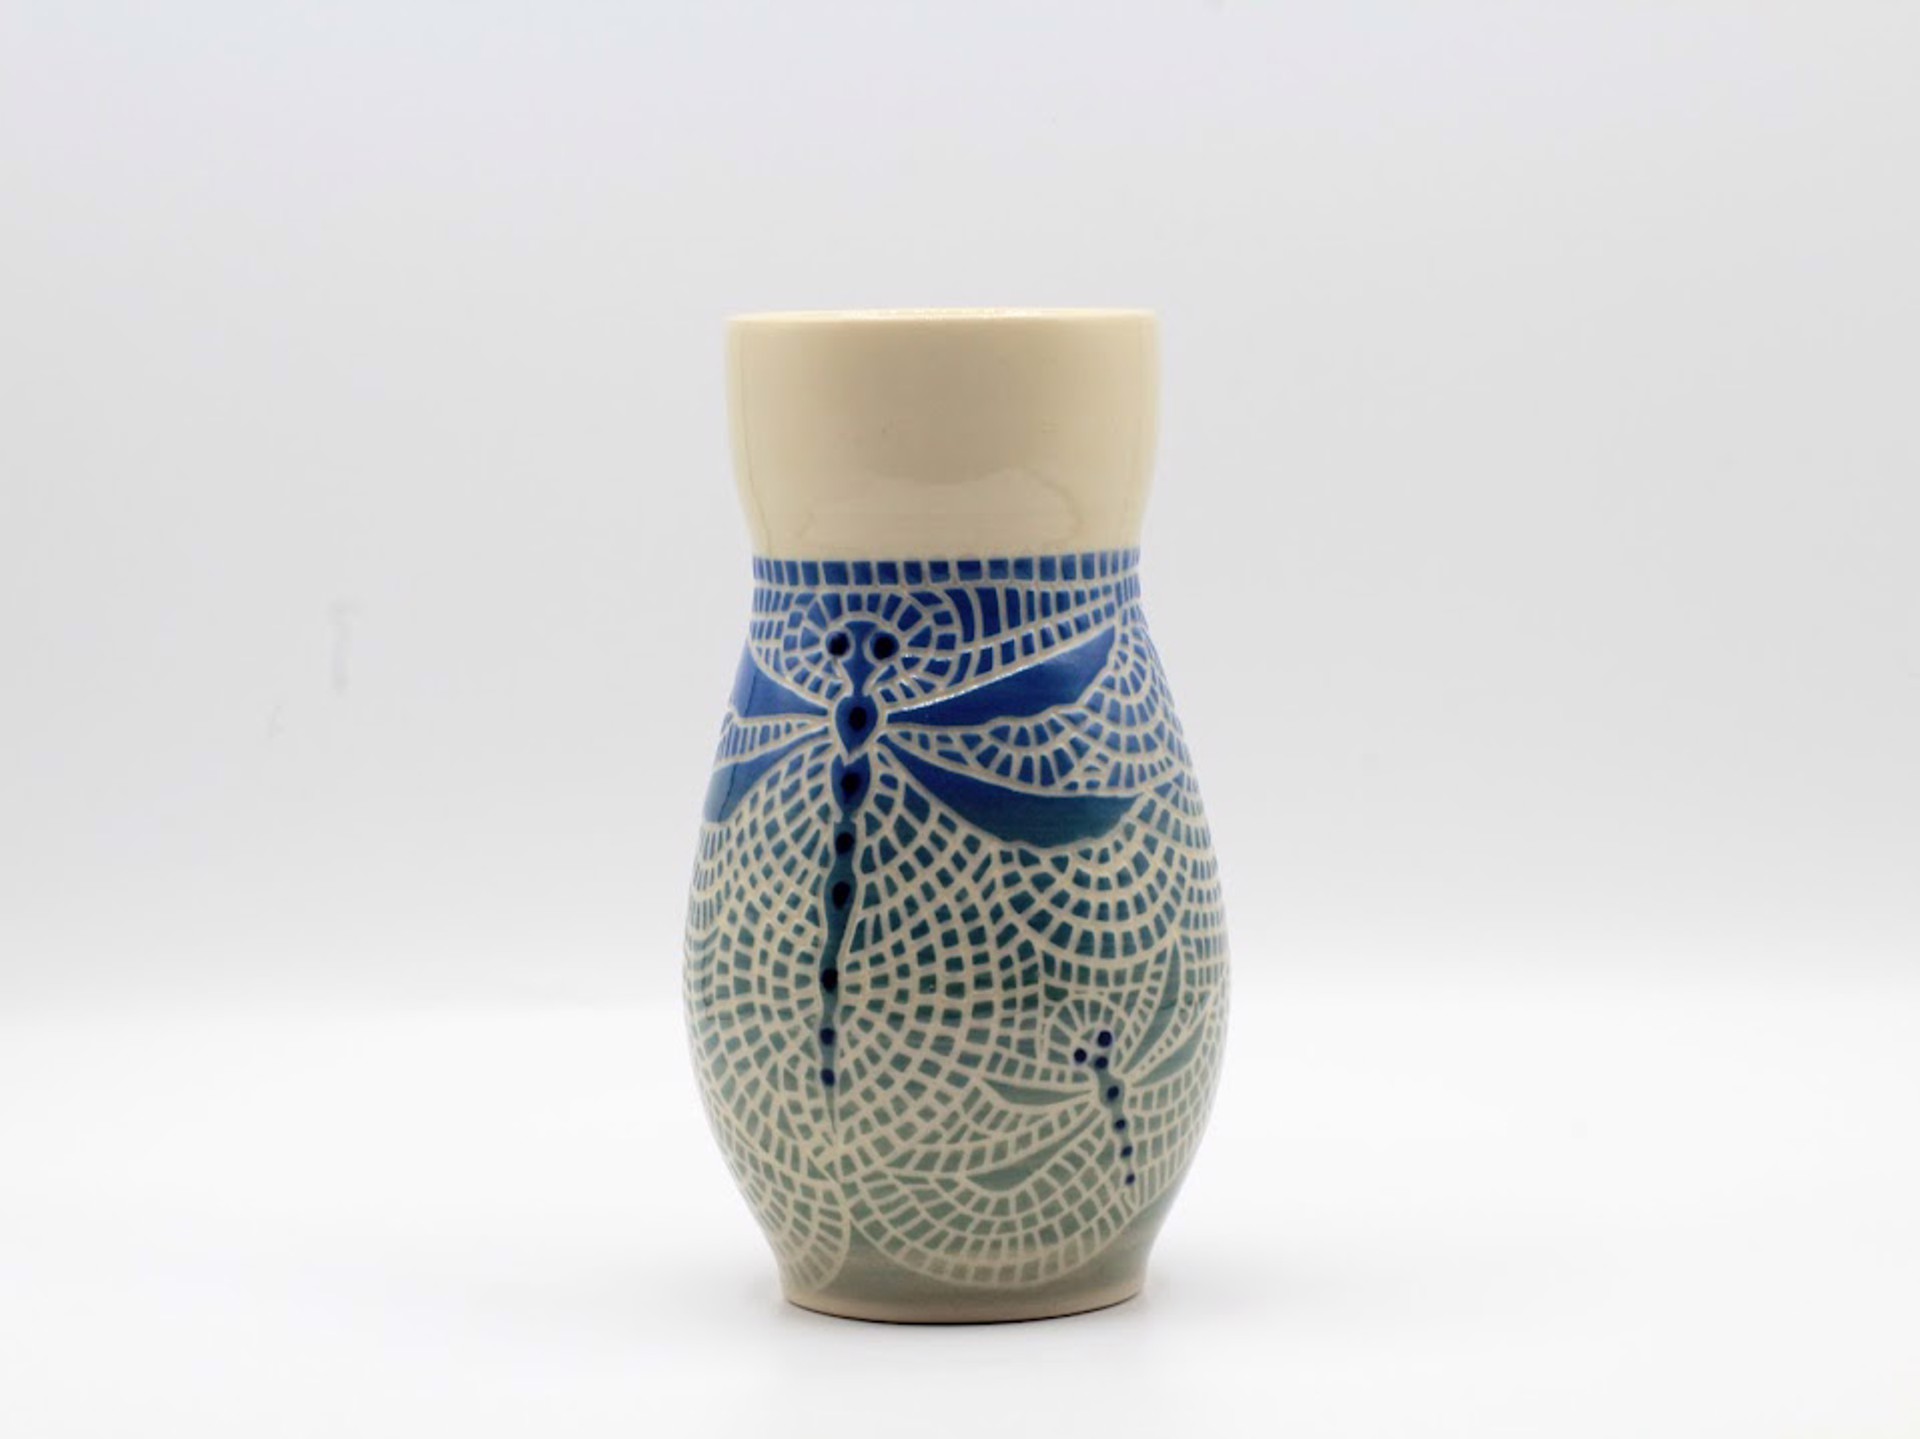 Dragonfly Vase Small by Kelly Price